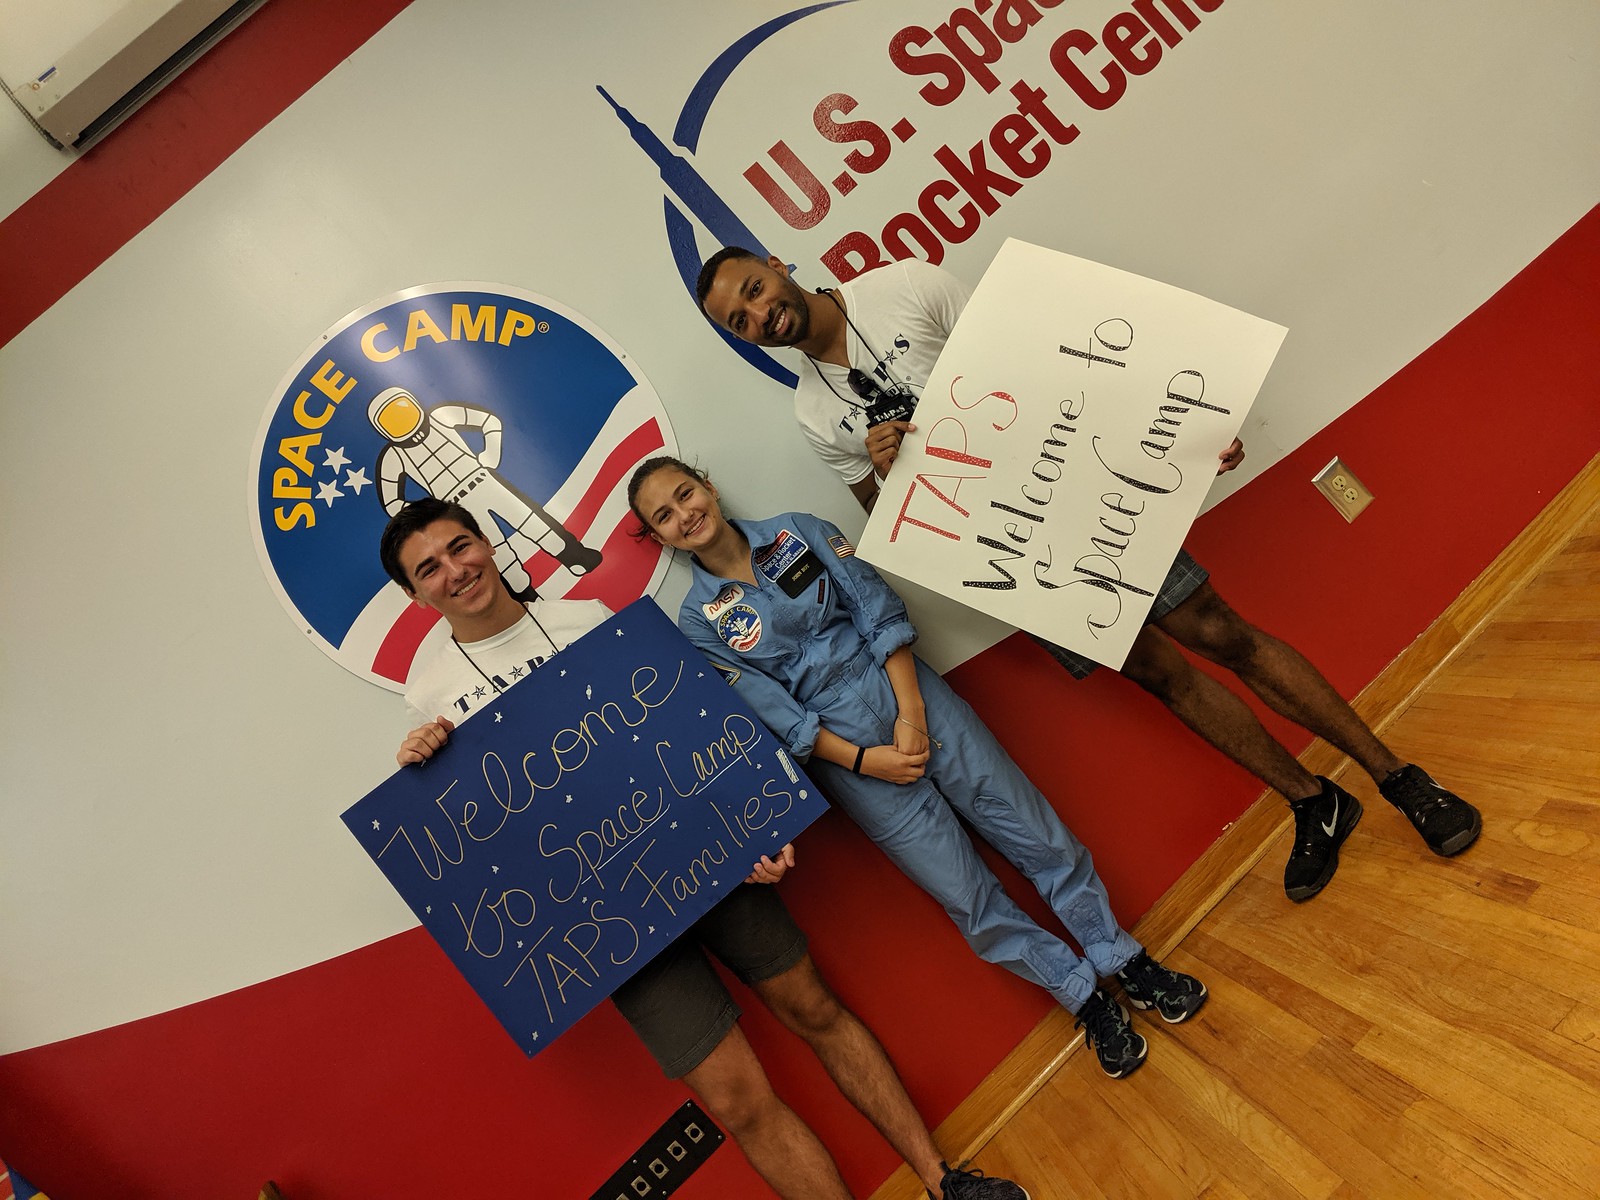 2019_YP_Space Camp 52